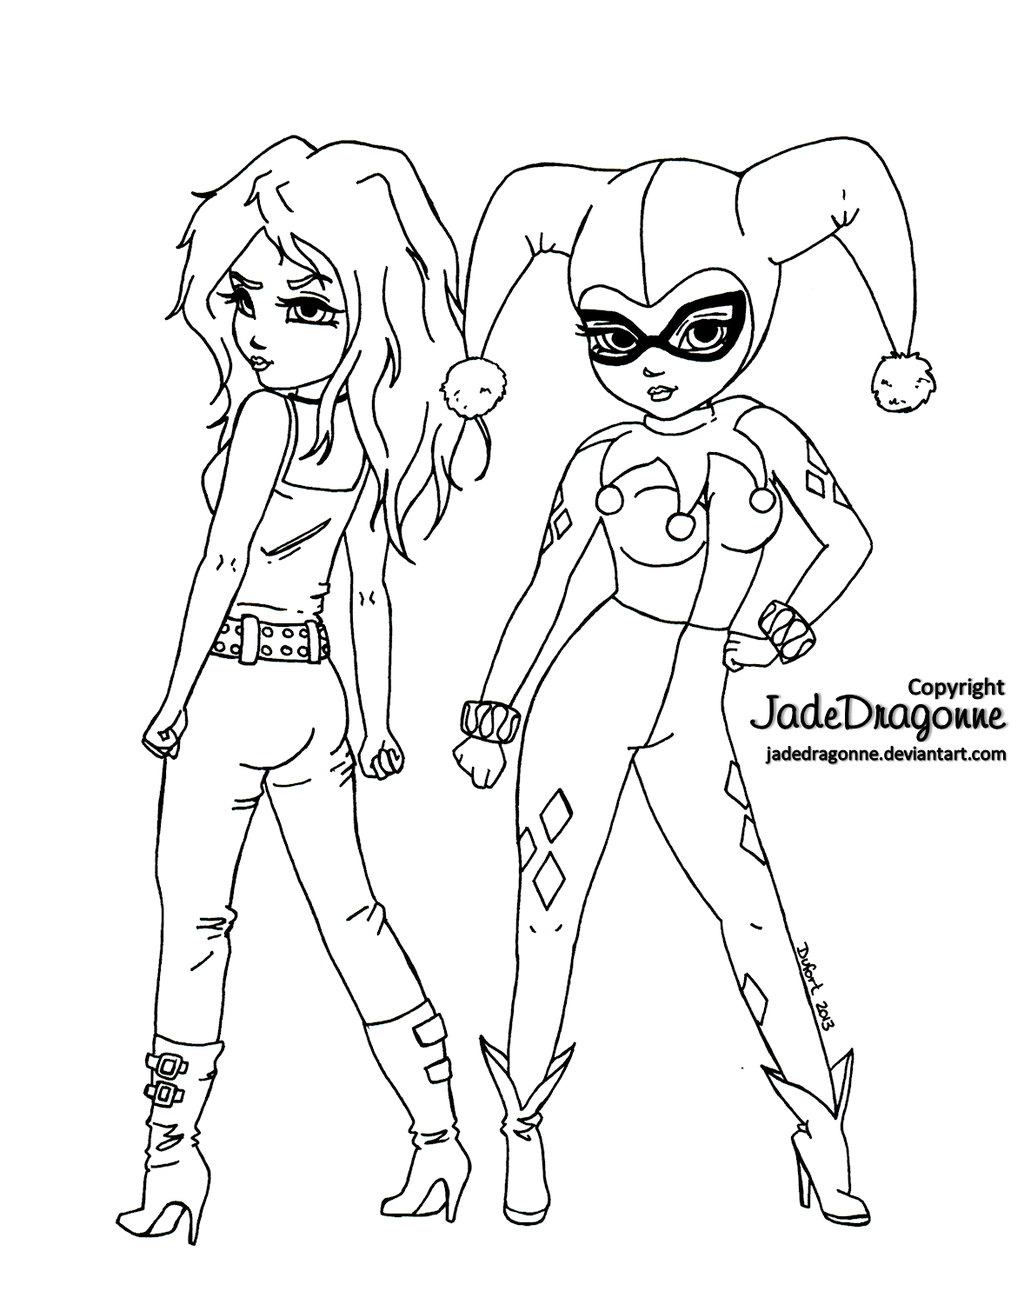 Harley quinn coloring pages to download and print for free